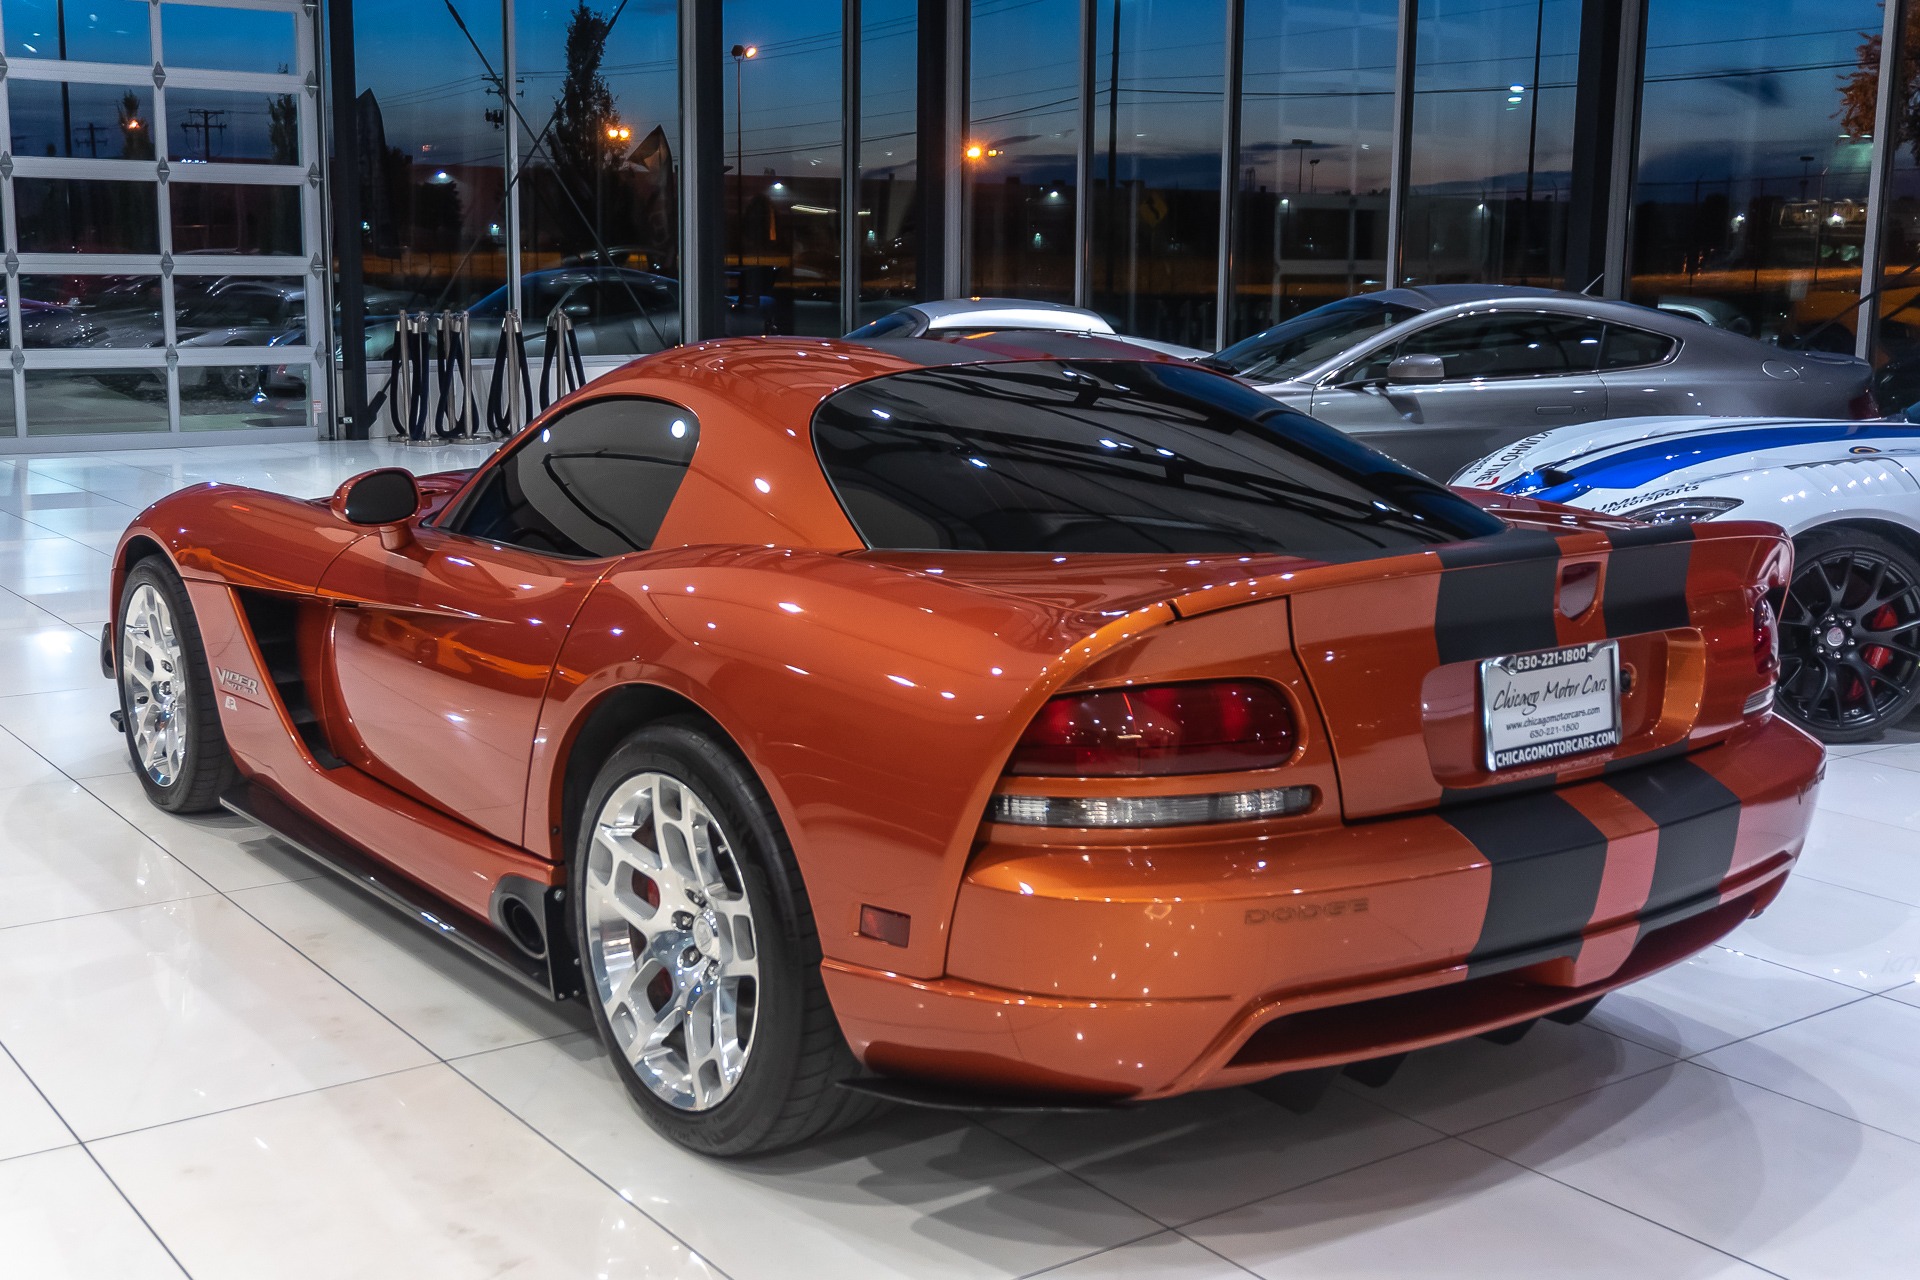 Used-2006-Dodge-Viper-SRT-10-Coupe-Copperhead-1-OF-52-PRODUCED